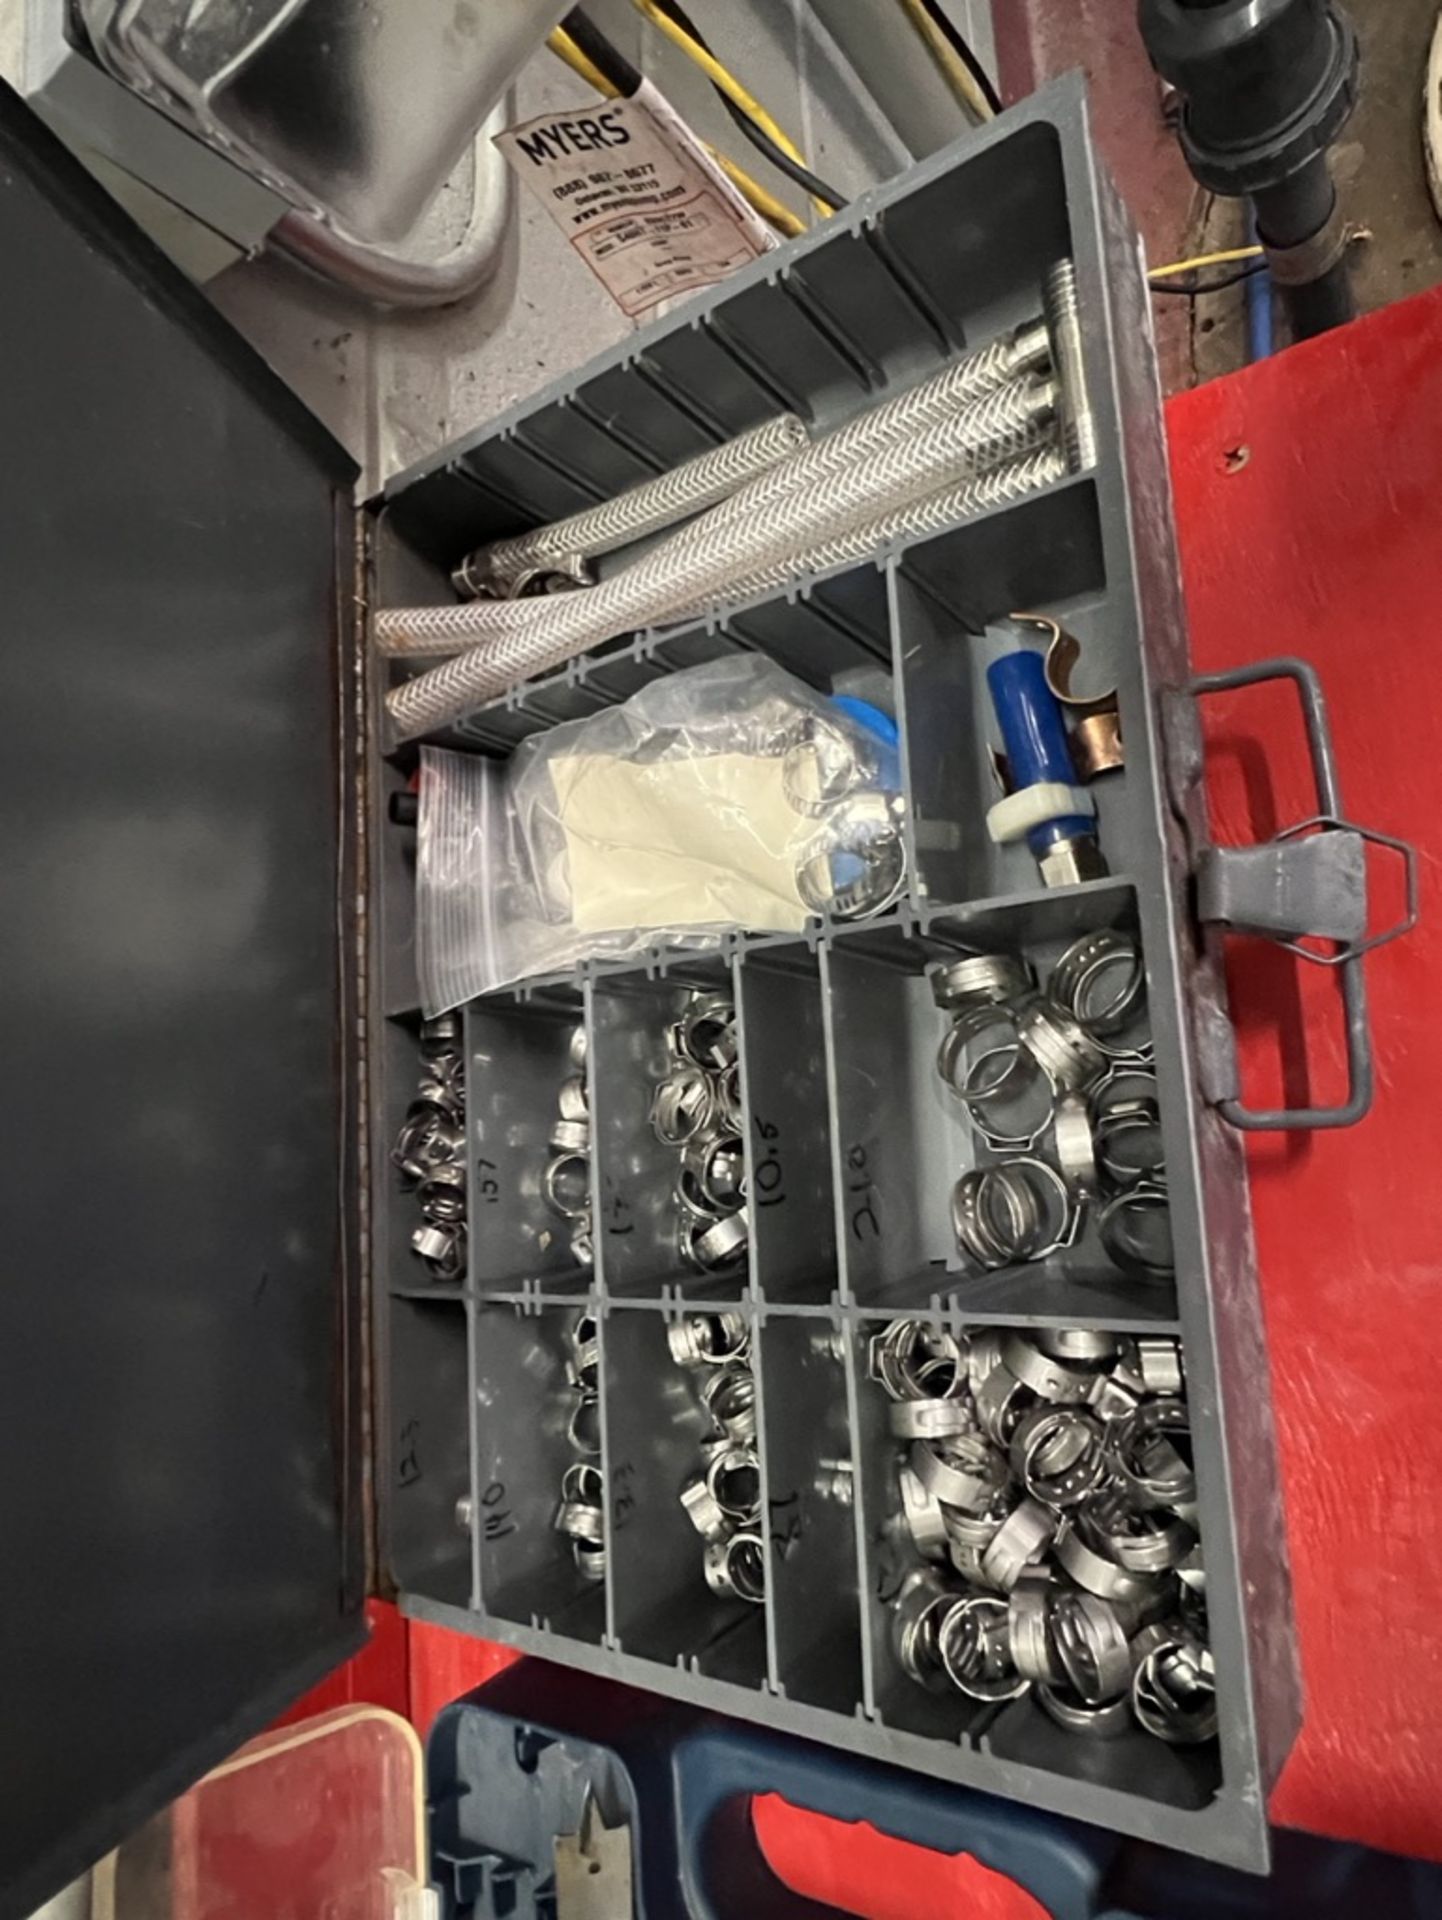 LOT OF: (2) PLASTIC TOOL BOXES, (1) METAL CRAFTSMAN TOOL BOX AND PICTURED SMALL TOOLS, DRILL BITS, - Image 6 of 15